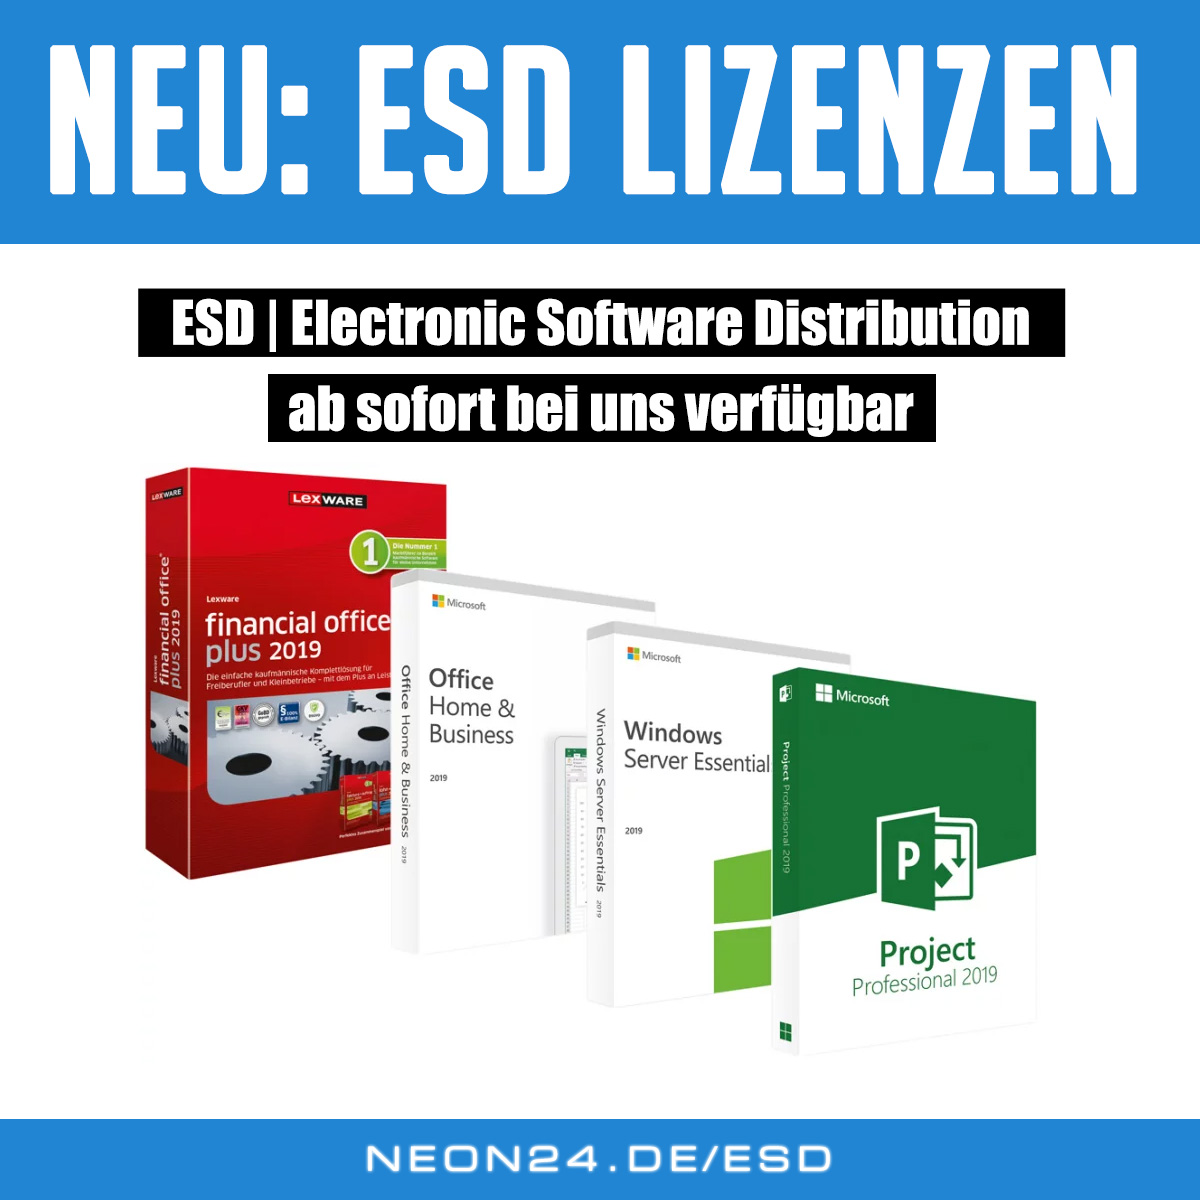 ESD | Electronic Software Distribution